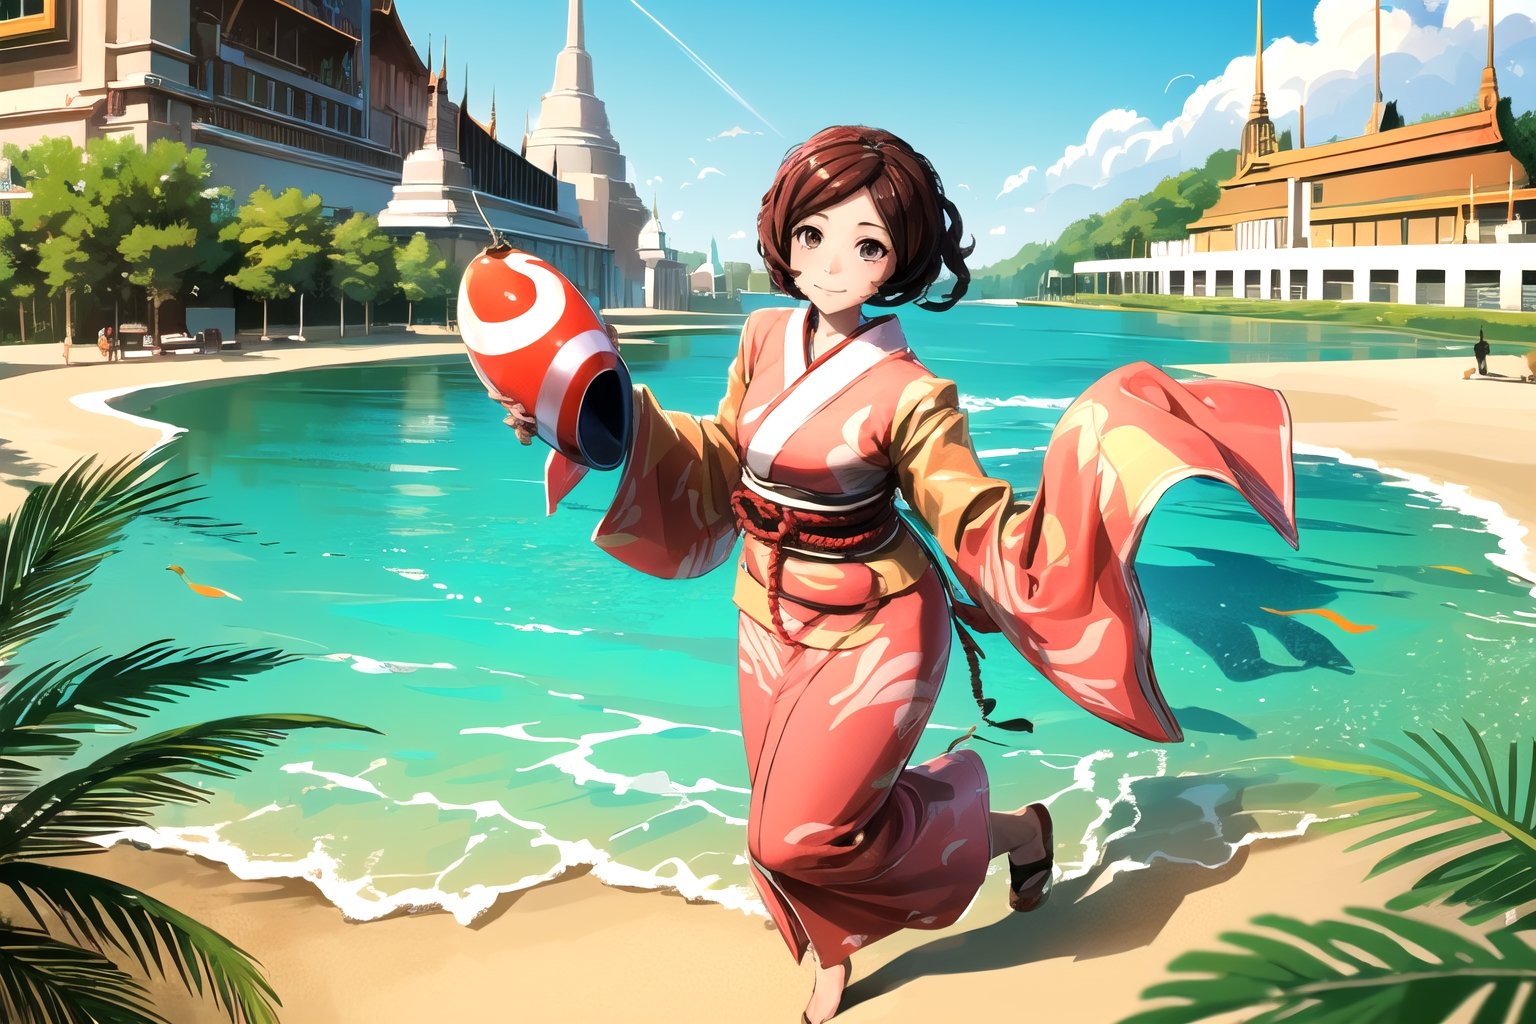 //Quality, (masterpiece), (best quality), 8k illustration,
//Character,1girl, solo, , , adult female, entoma, skeleton hands, bone hands, hone arms
//Fashion,
//Others,
,Songkran Festival, Songkran day, water splash, water festival, water gun, sand castle, water bucket, golden pagoda, golden temple, festival flags, effect of flowing water, colorful style, Thailand decoration, colorful swimming glasses, Japanese outfit, colorful long sleeve 